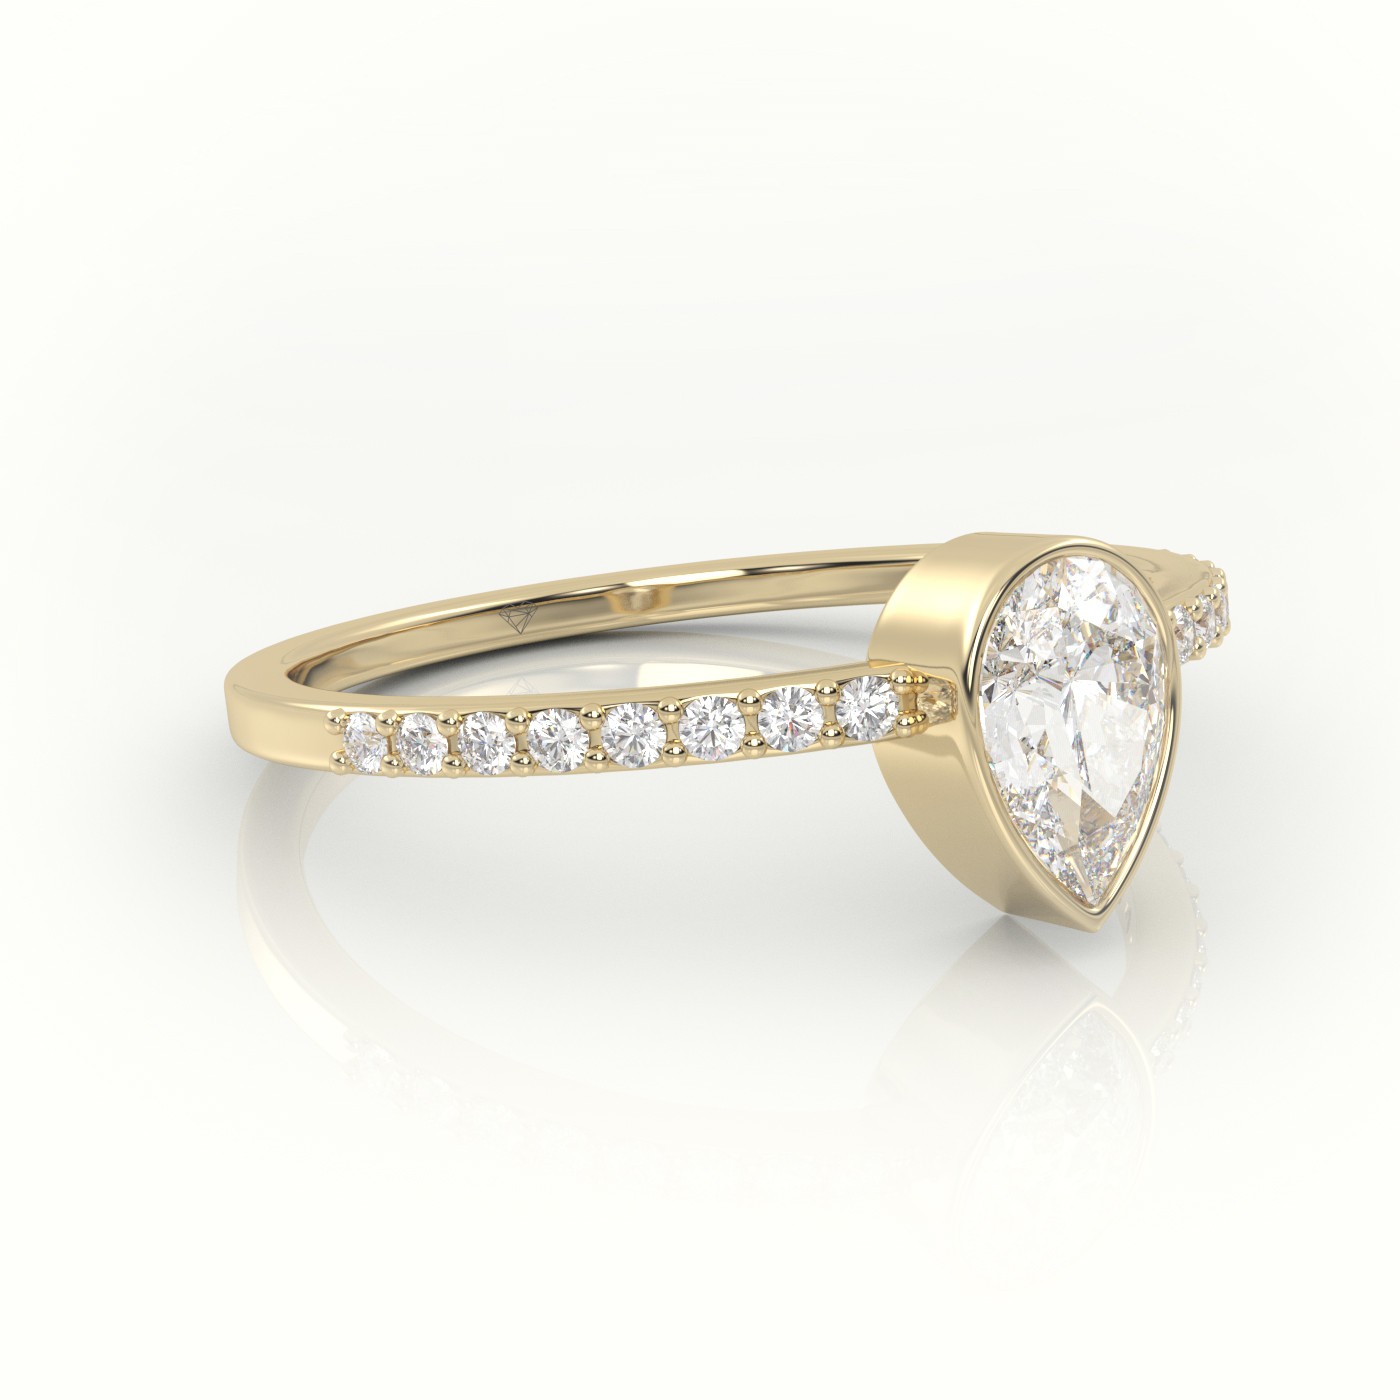 18K YELLOW GOLD PEAR CUT DIAMOND CHANNEL SETTING ENGAGEMENT RING